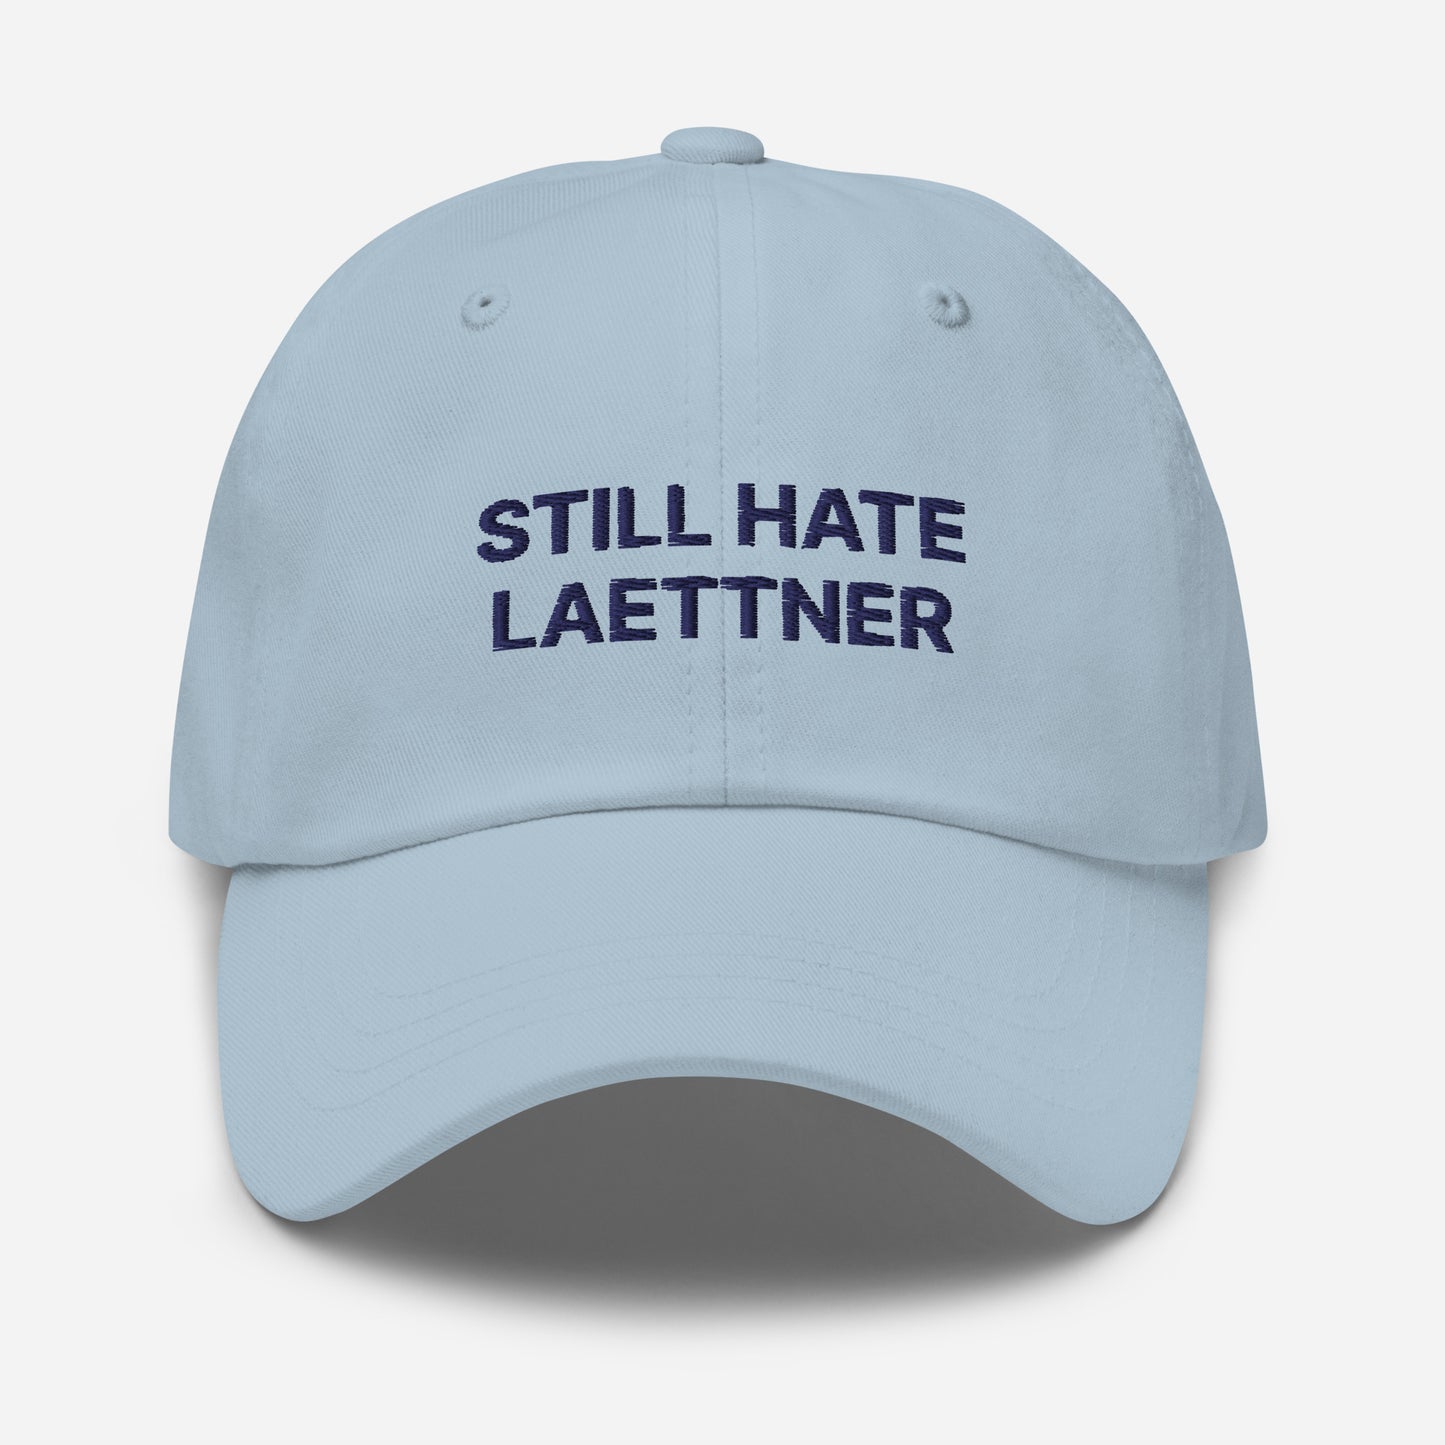 "STILL HATE LAETTNER" UNC basketball embroidered hat